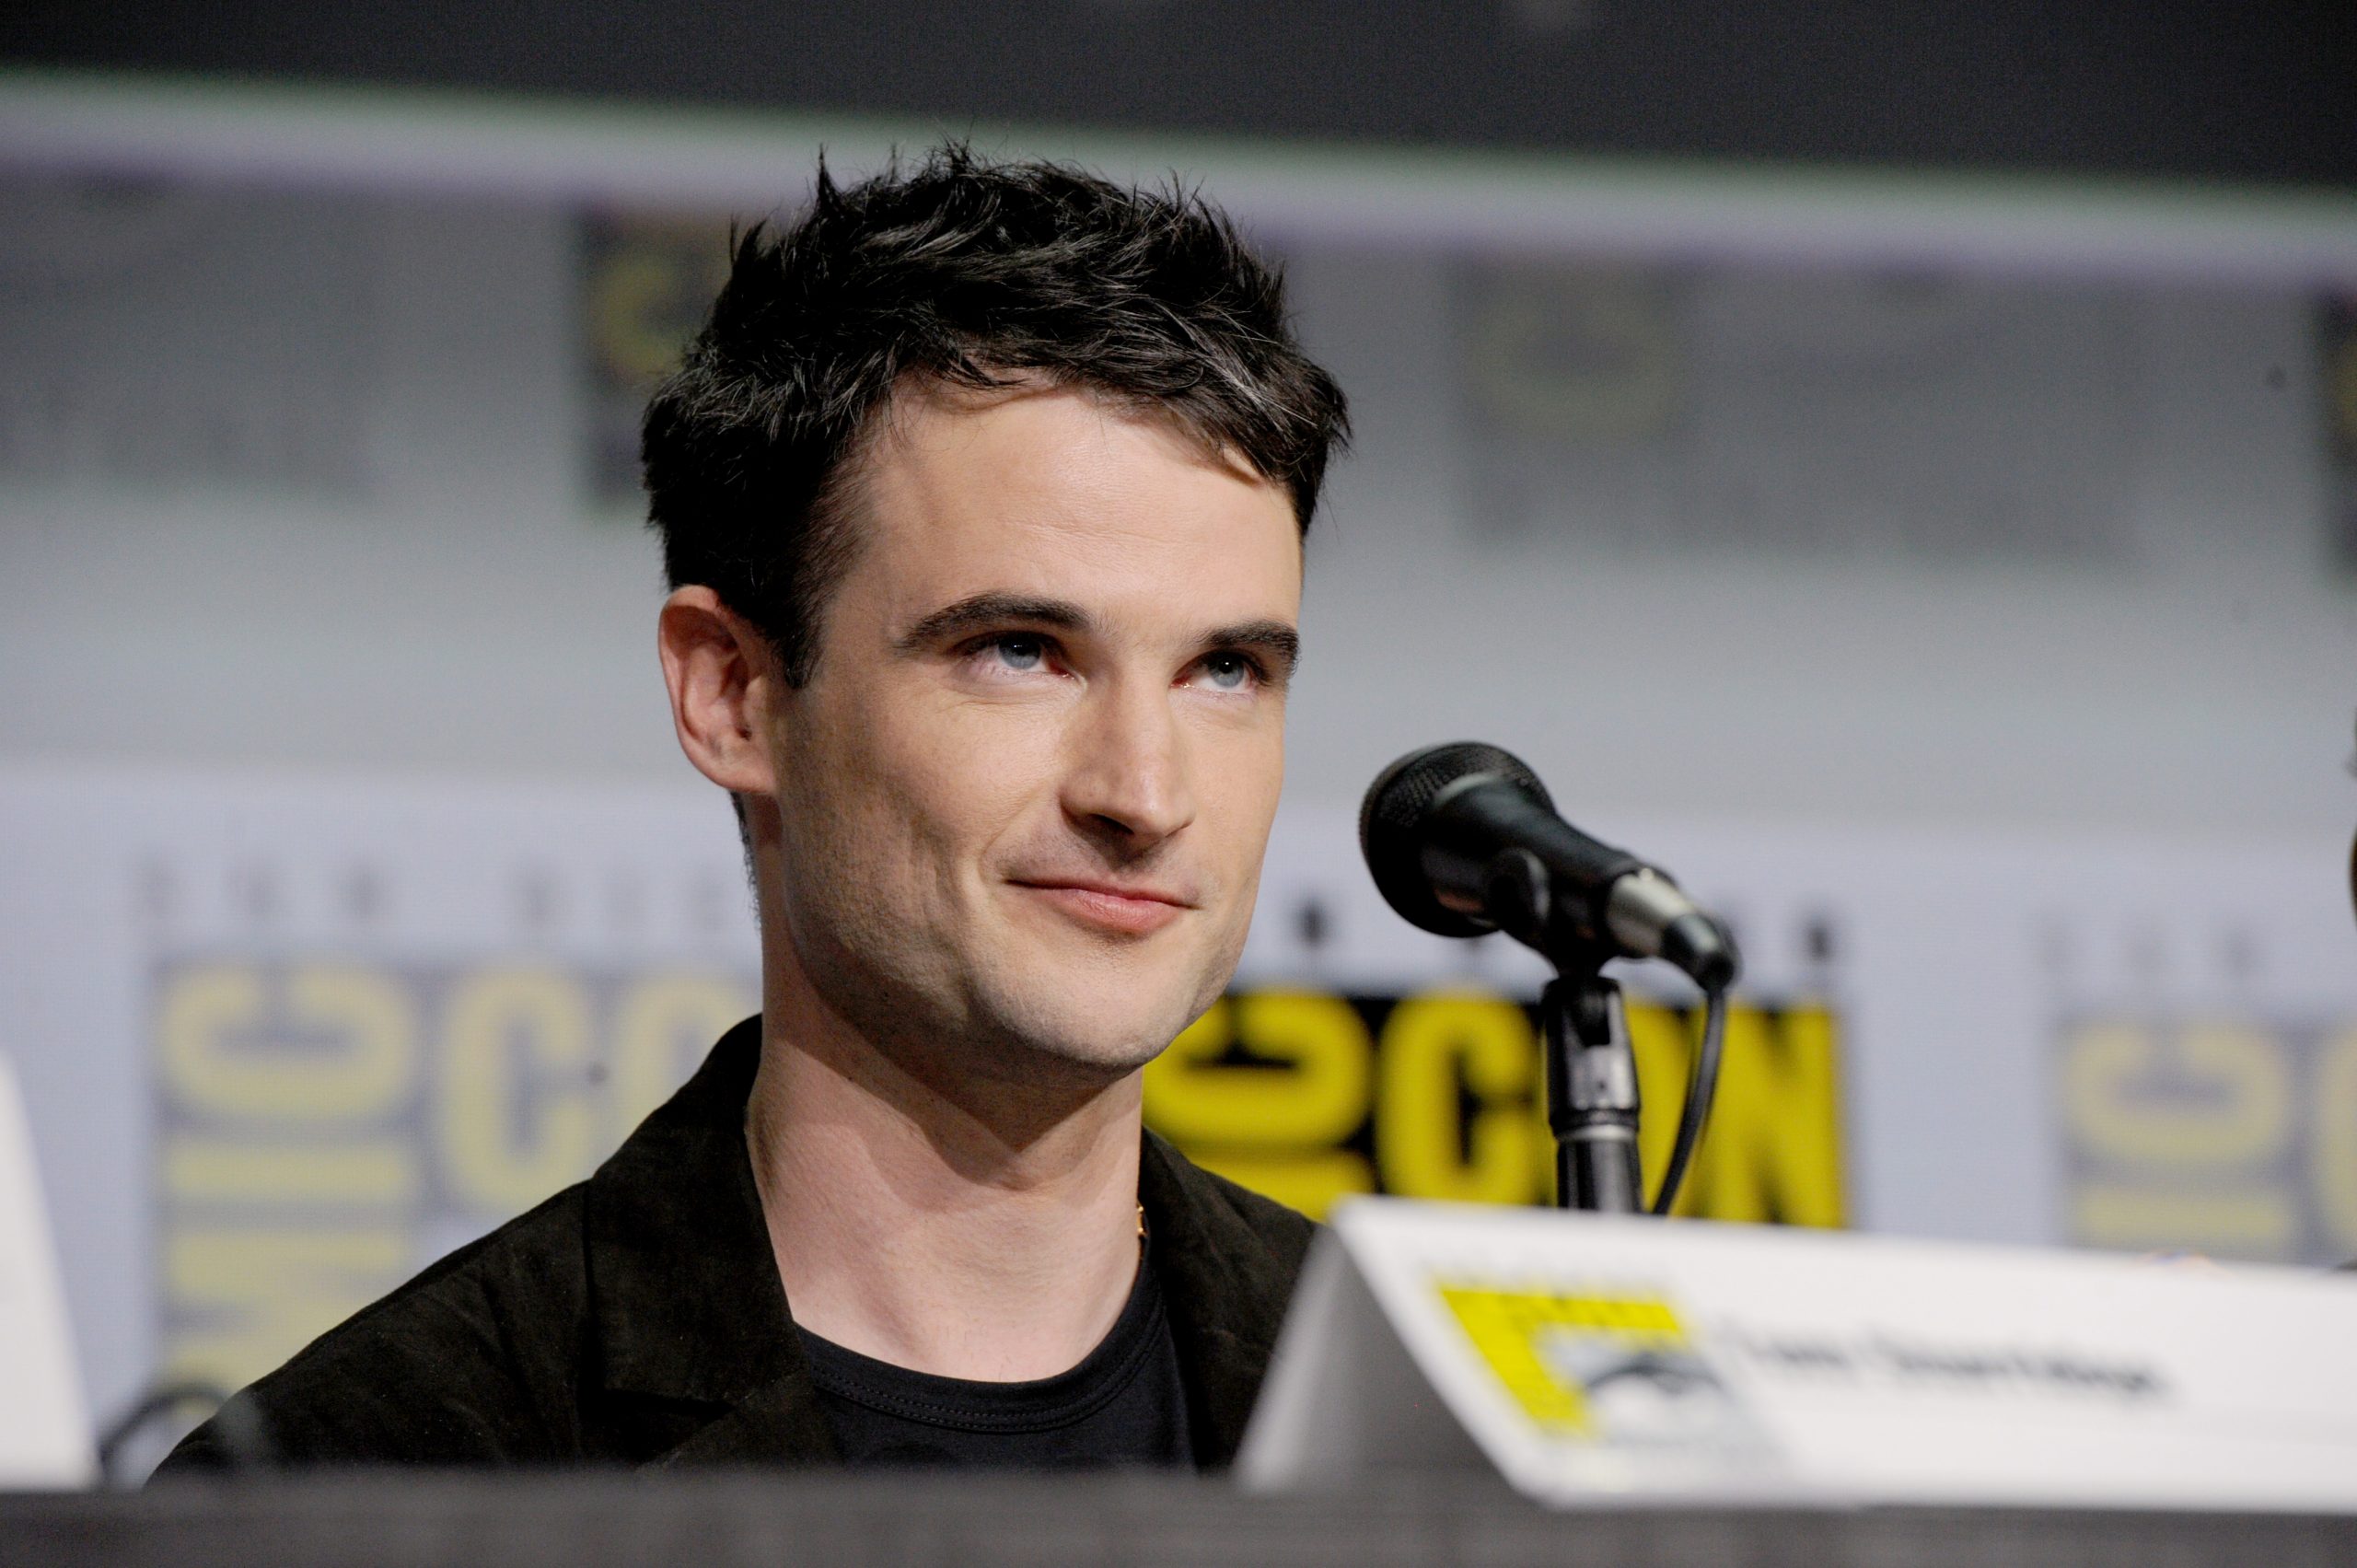 Tom Sturridge sits in front of San Diego Comic-Con sign.